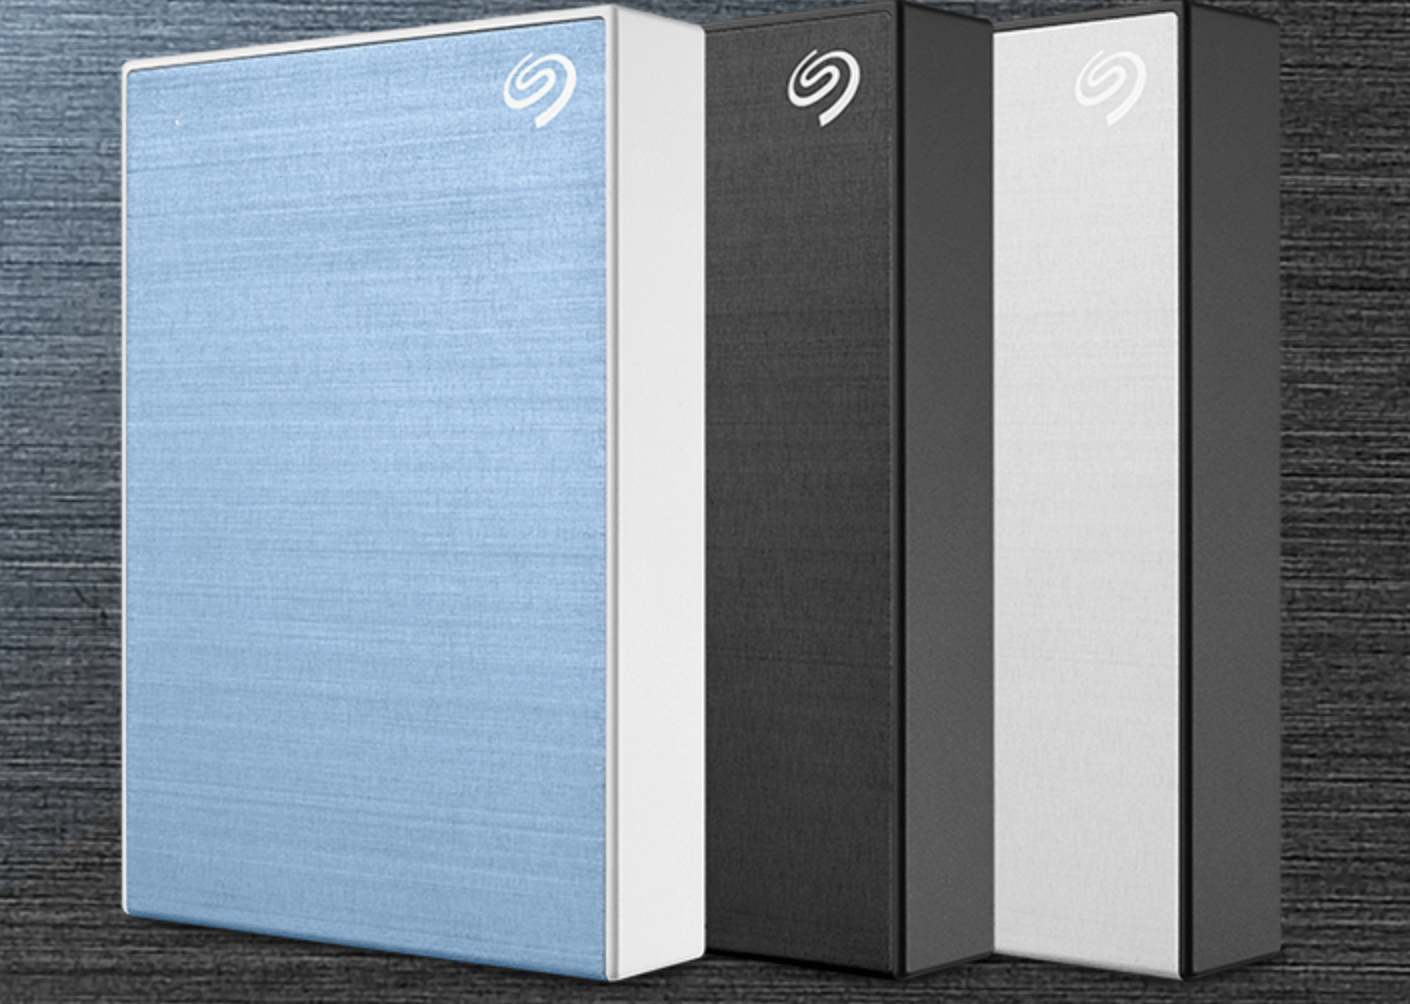 Price Comparison and Review Seagate Backup Plus External Hard Drive Portable HDD